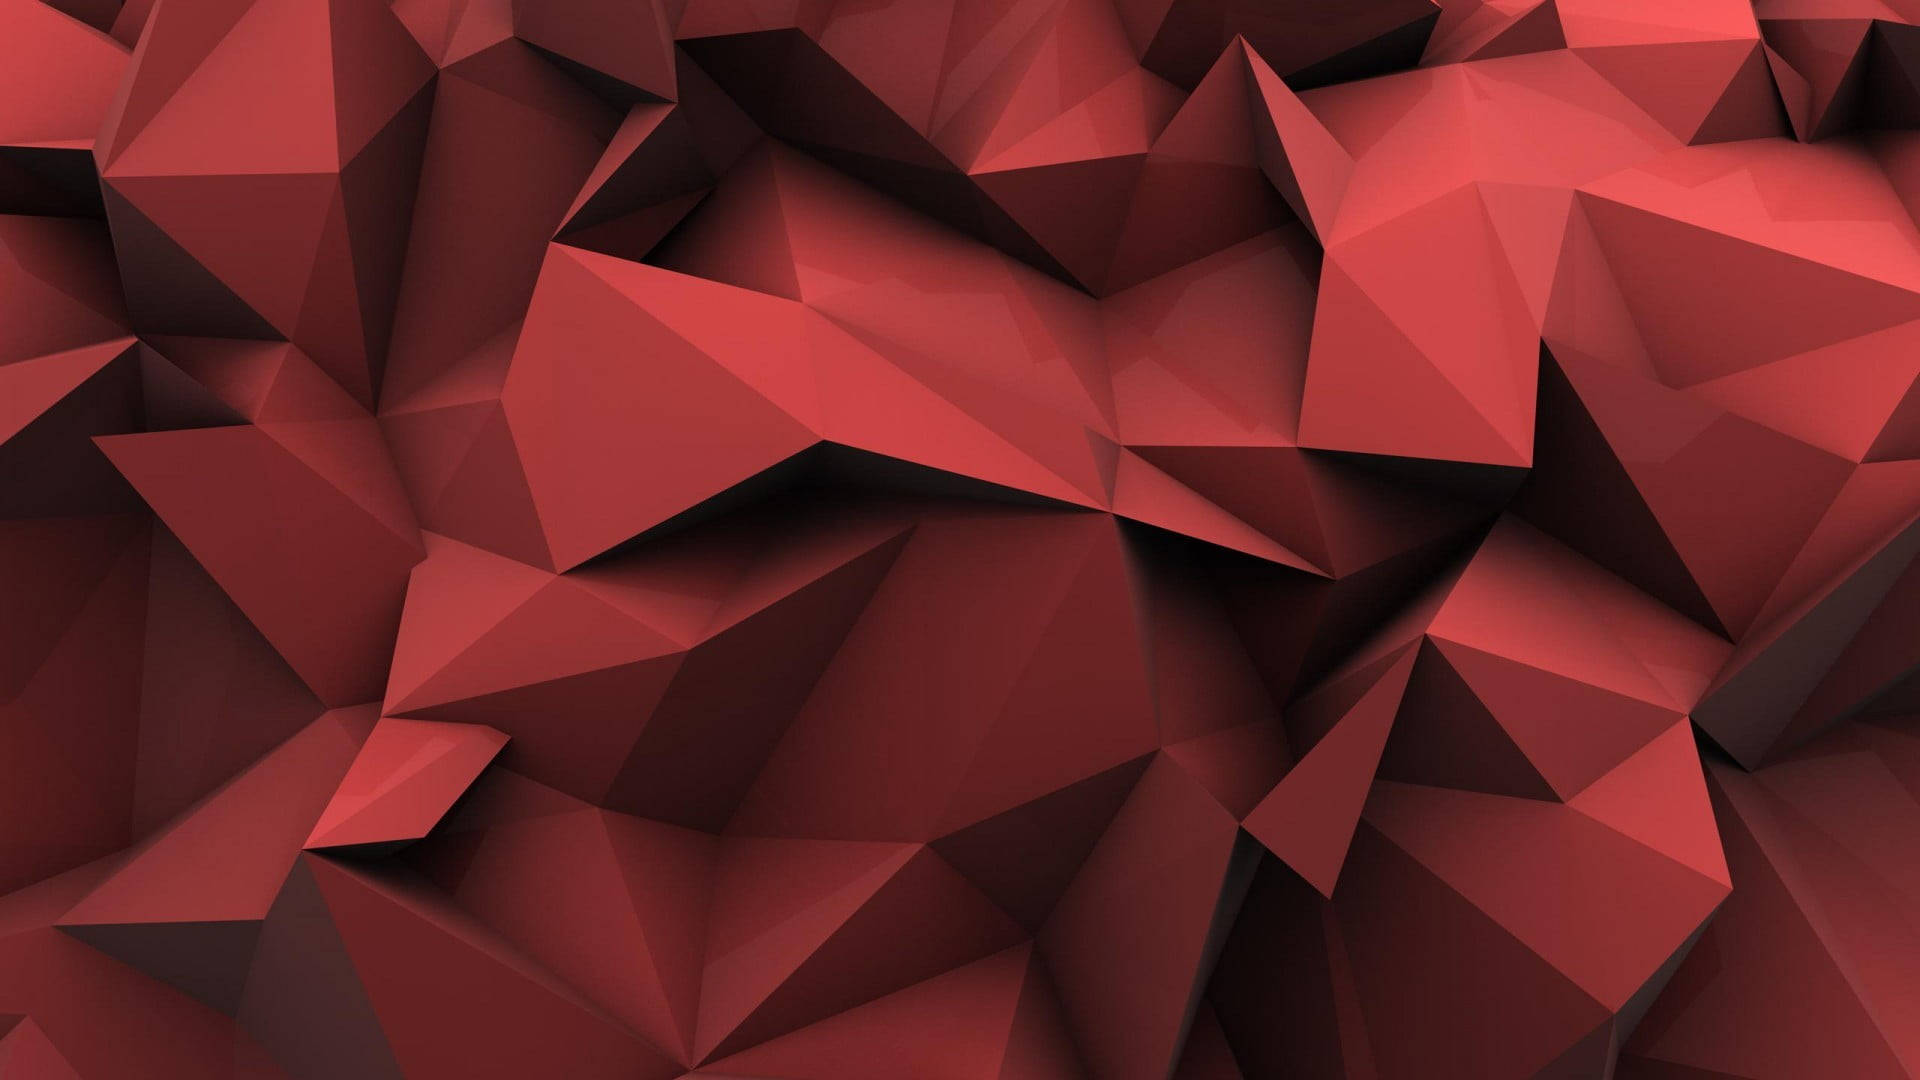 999 Red Abstract Pictures  Download Free Images on Unsplash